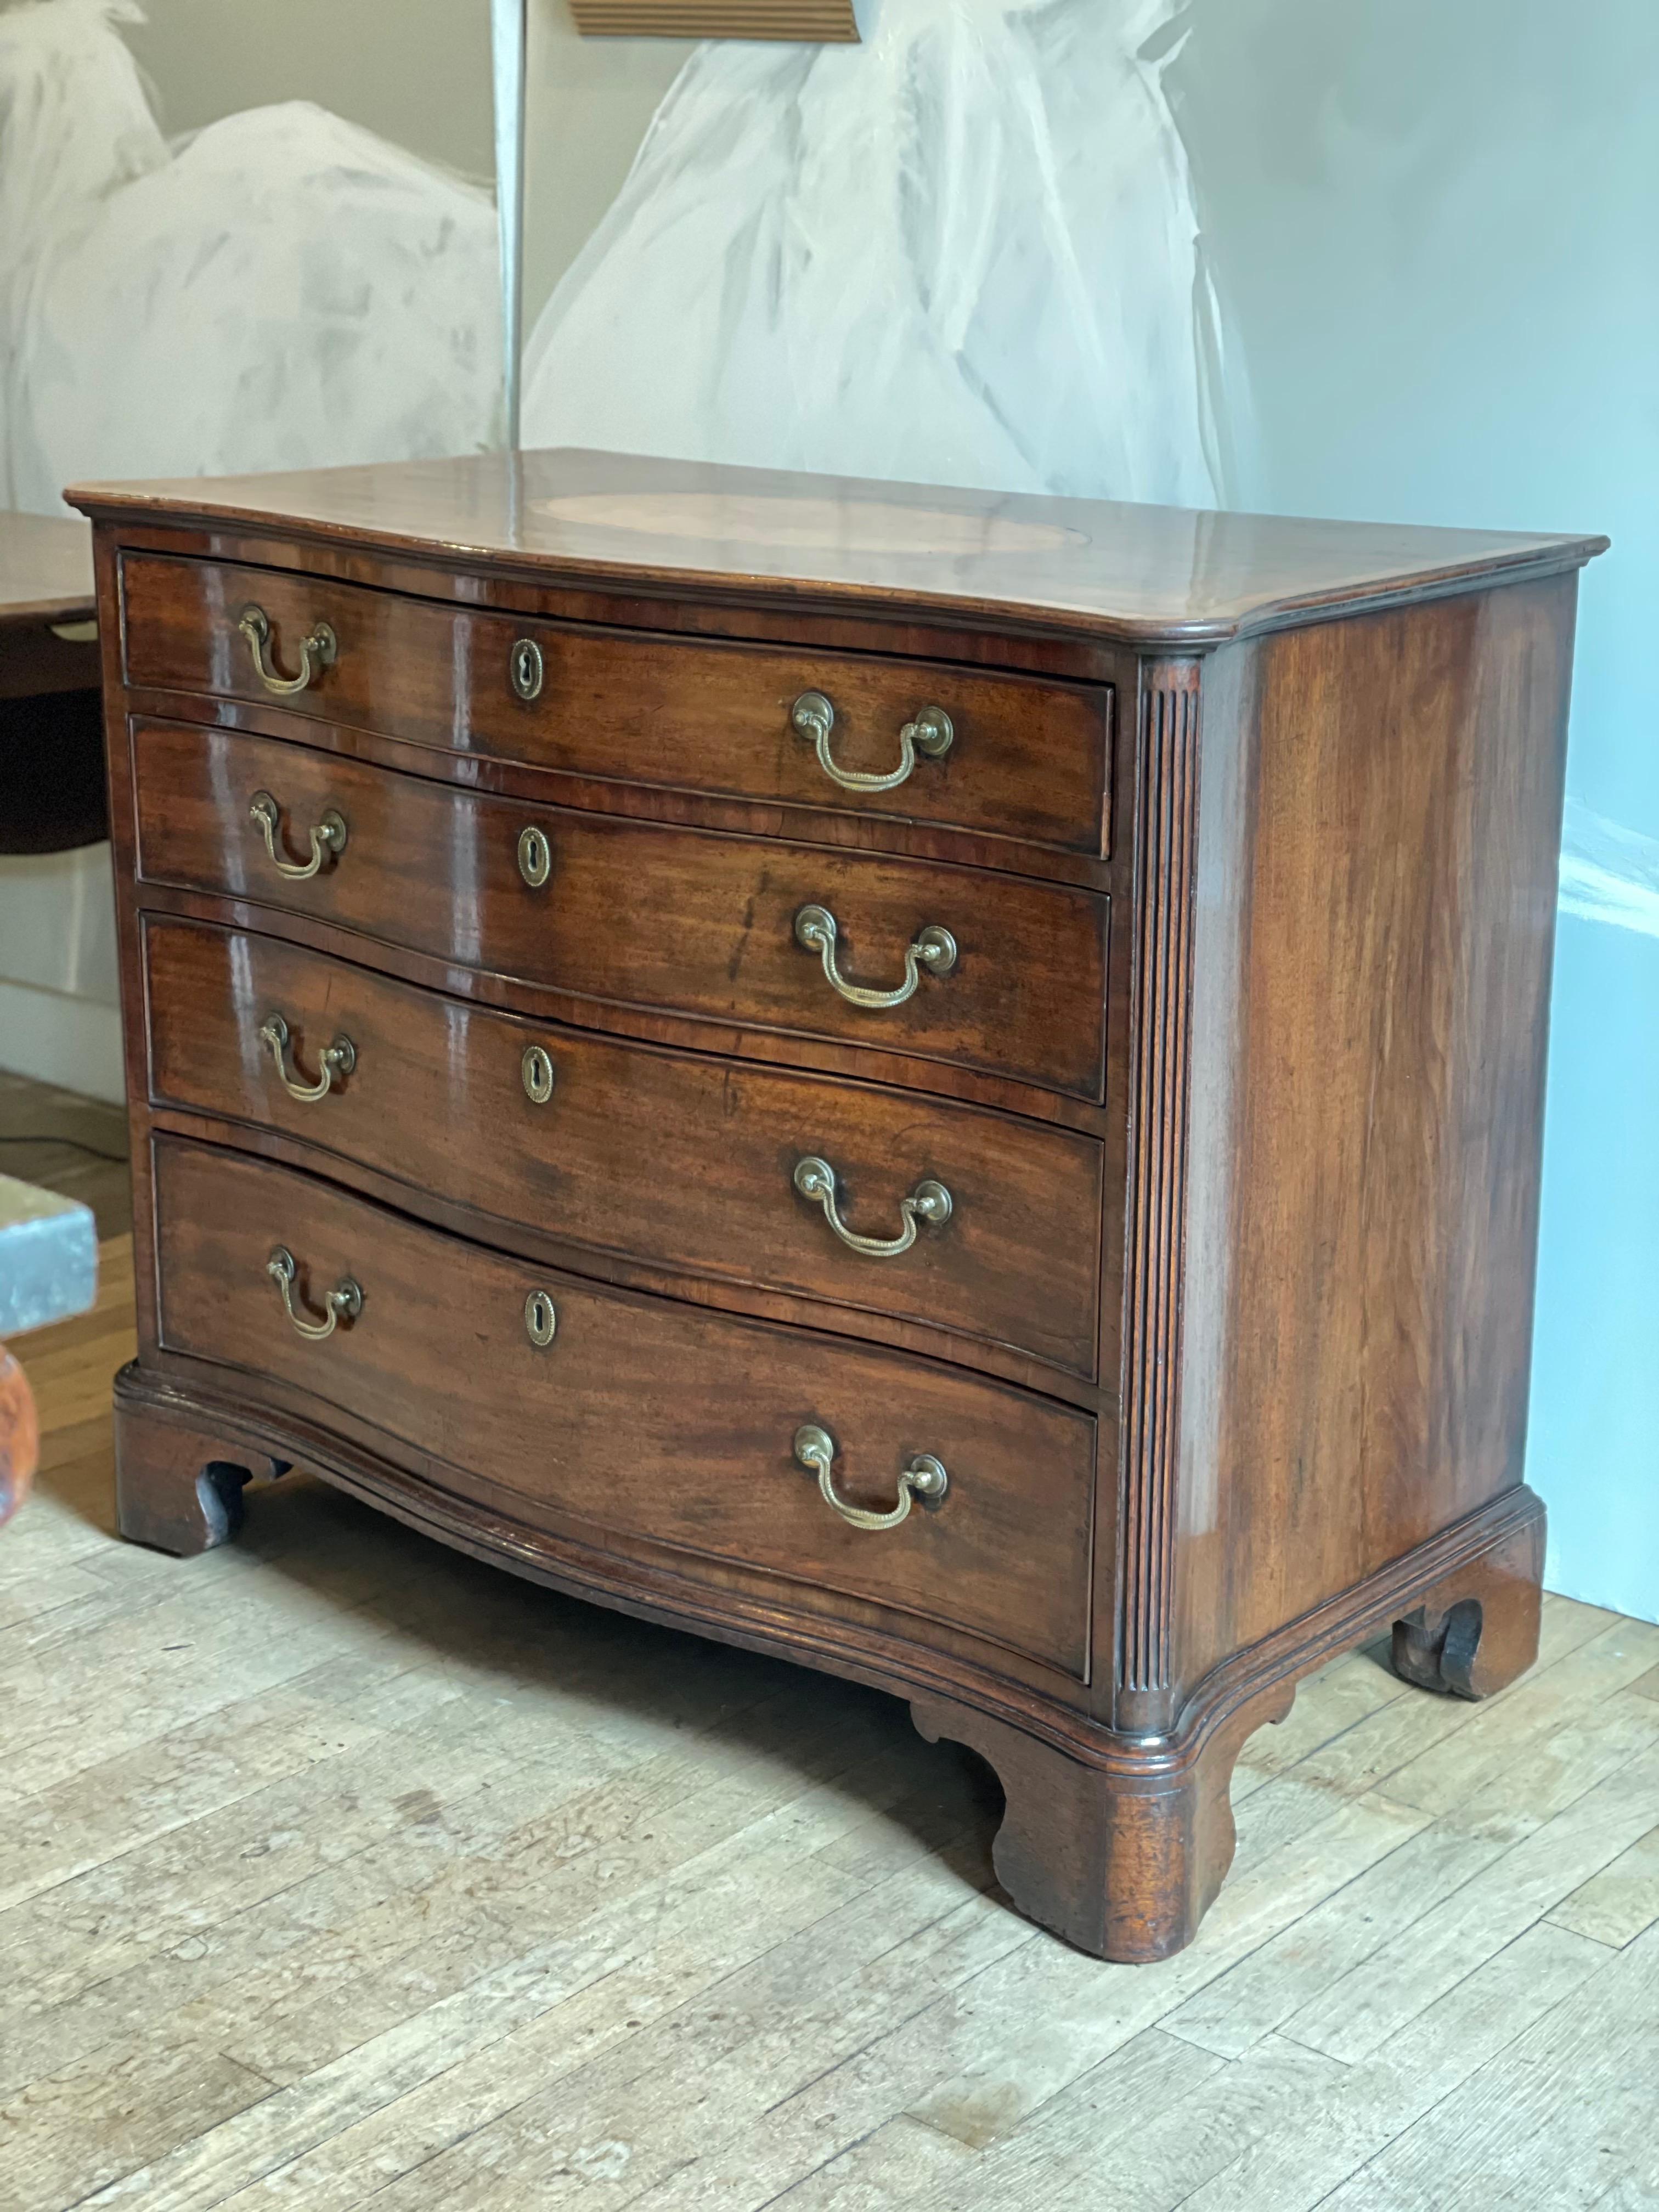 Inlay Chippendale Satinwood & Tulipwood Inlaid Mahogany Serpentine Chest of Drawers